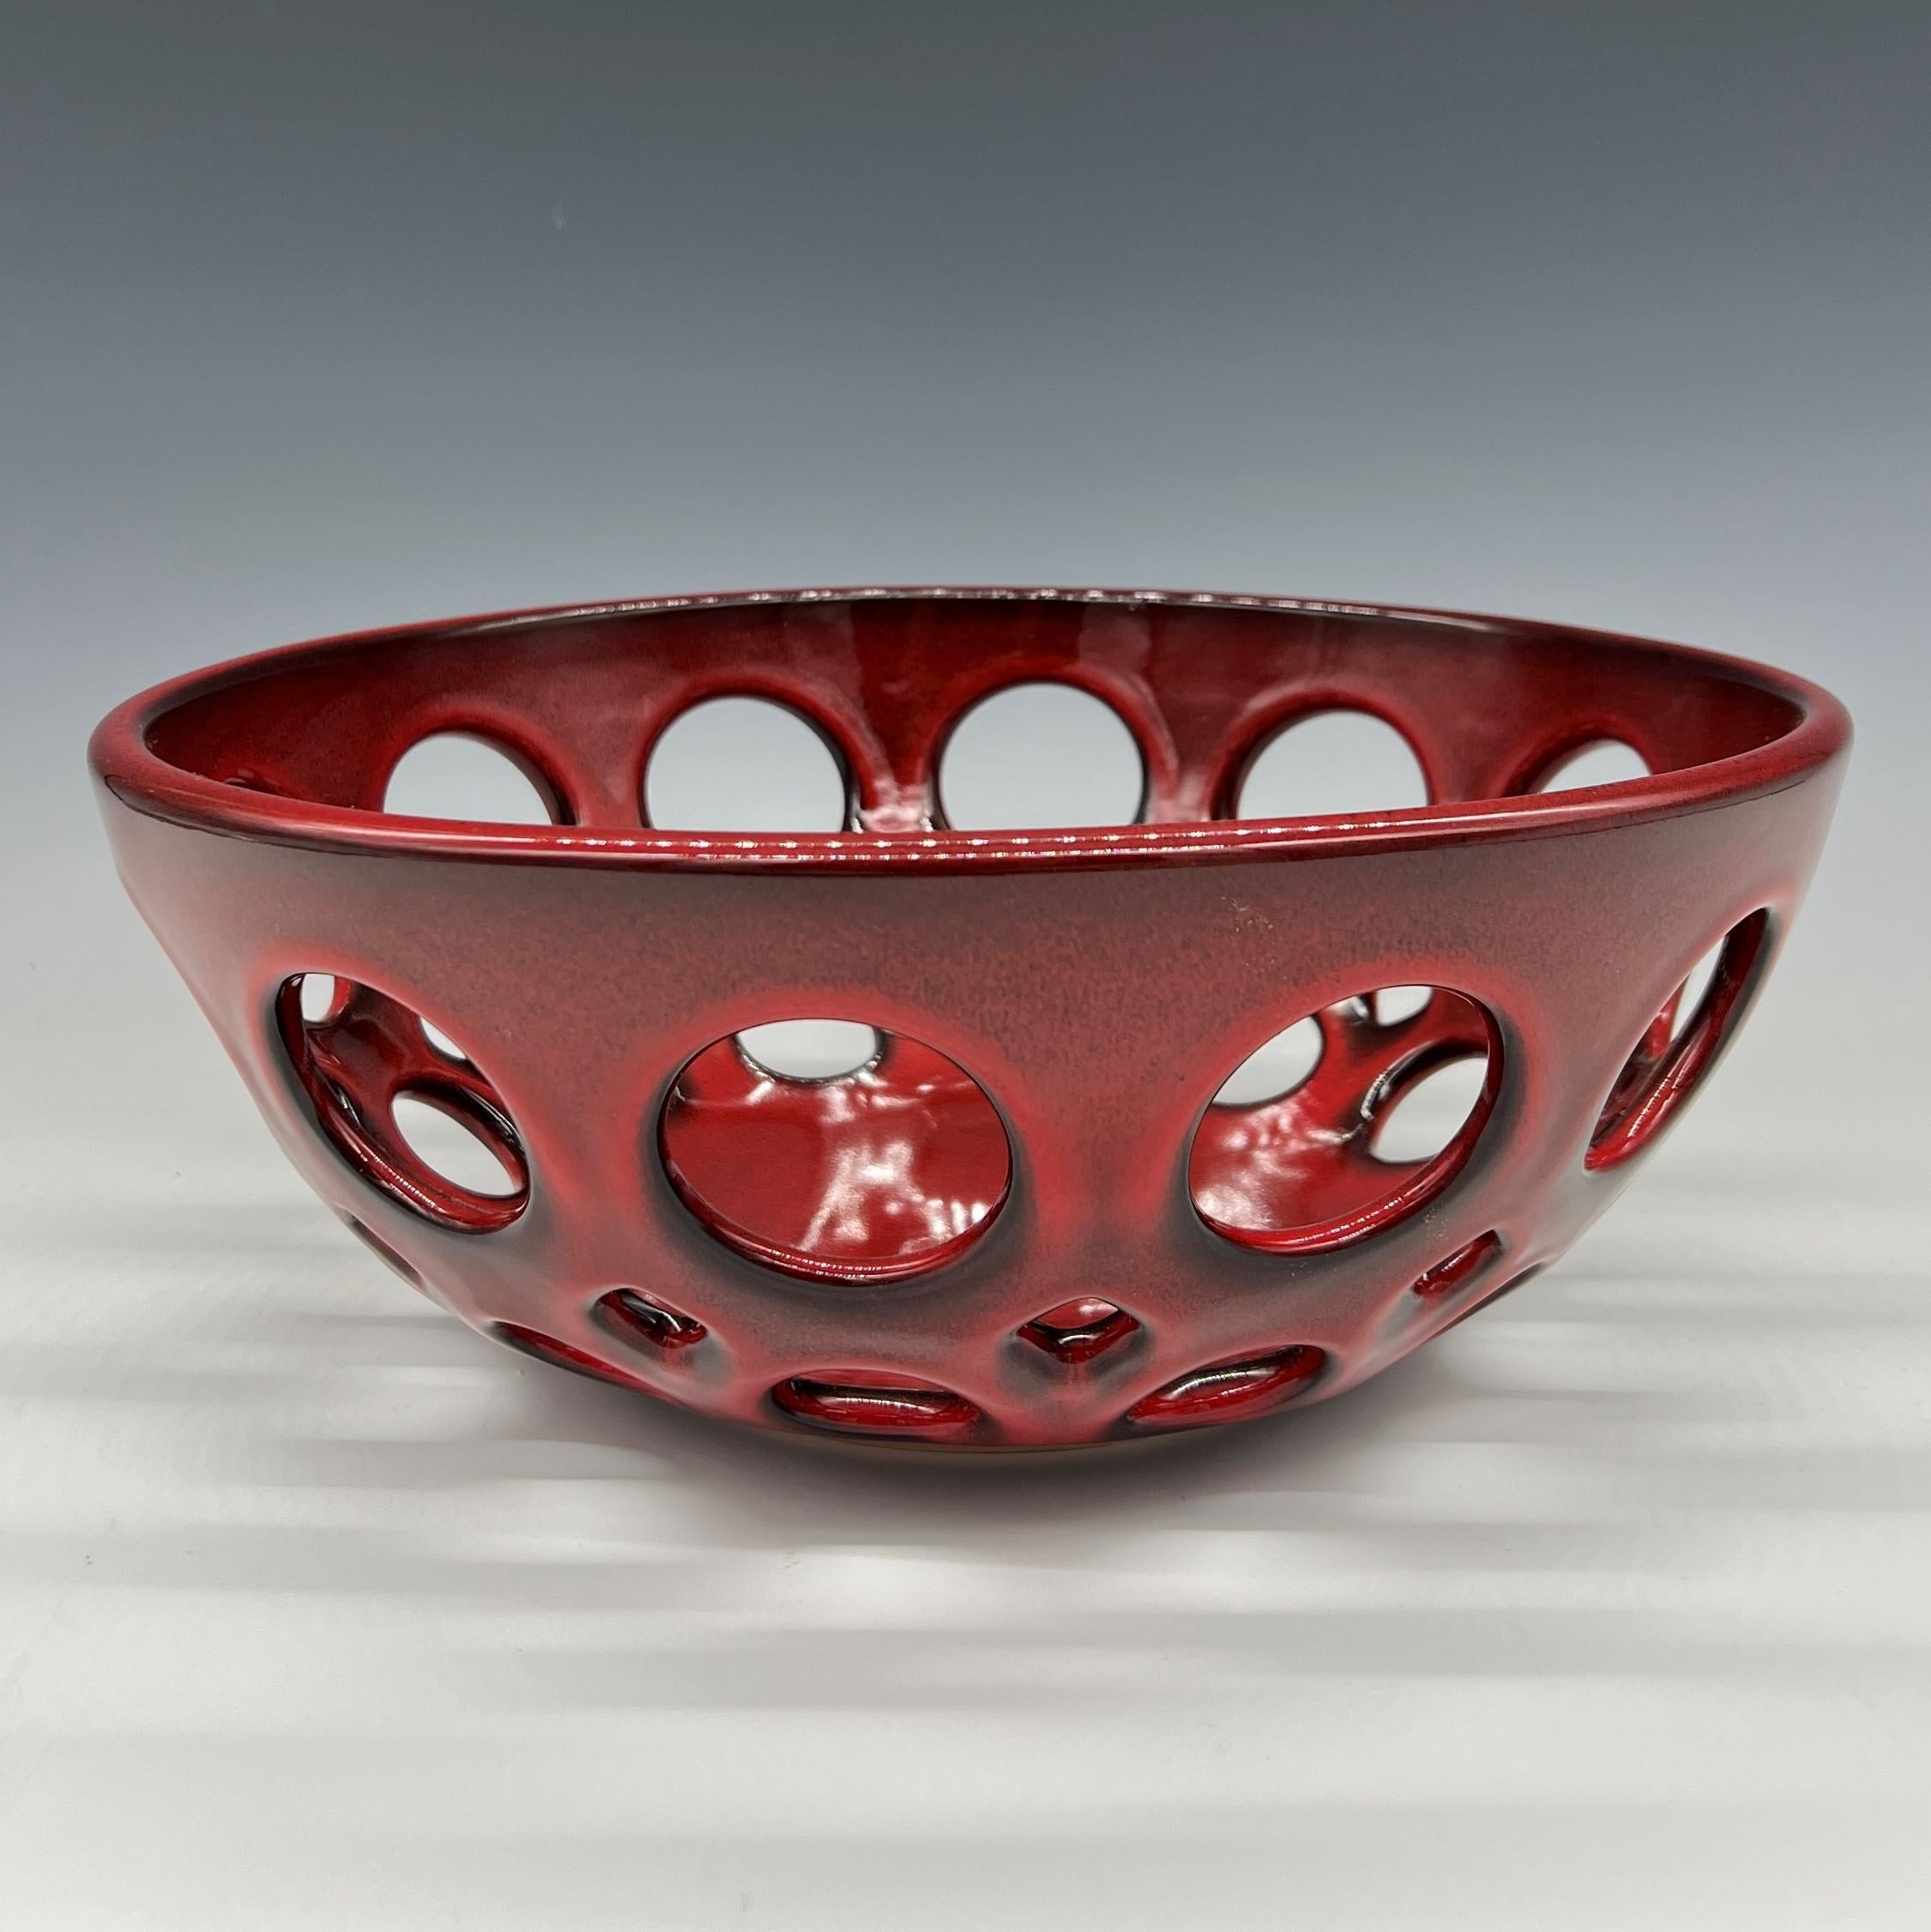 Inspired by Mid-Century Modern design, the pierced collection is wheel thrown and hand pierced stoneware with a glossy red glaze that breaks to black along the edges. Small holes are created when the clay is still wet and then each hole is